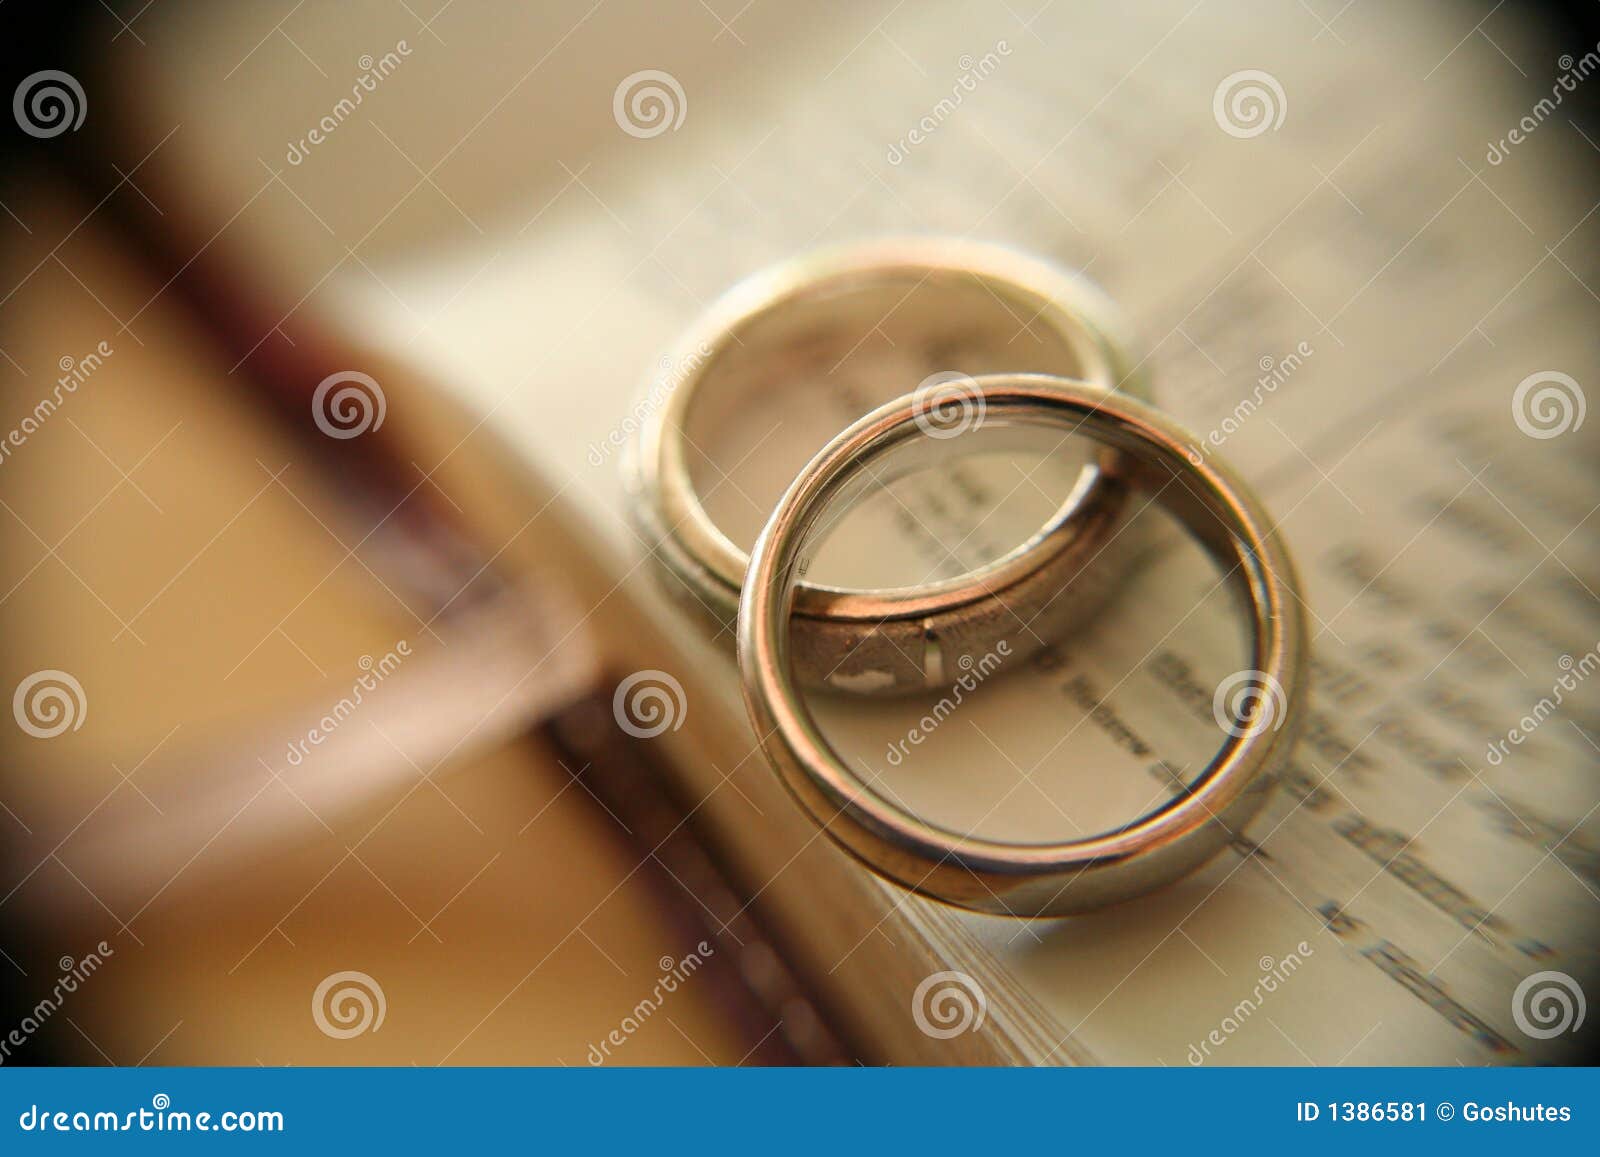 Wedding ring bible pictures